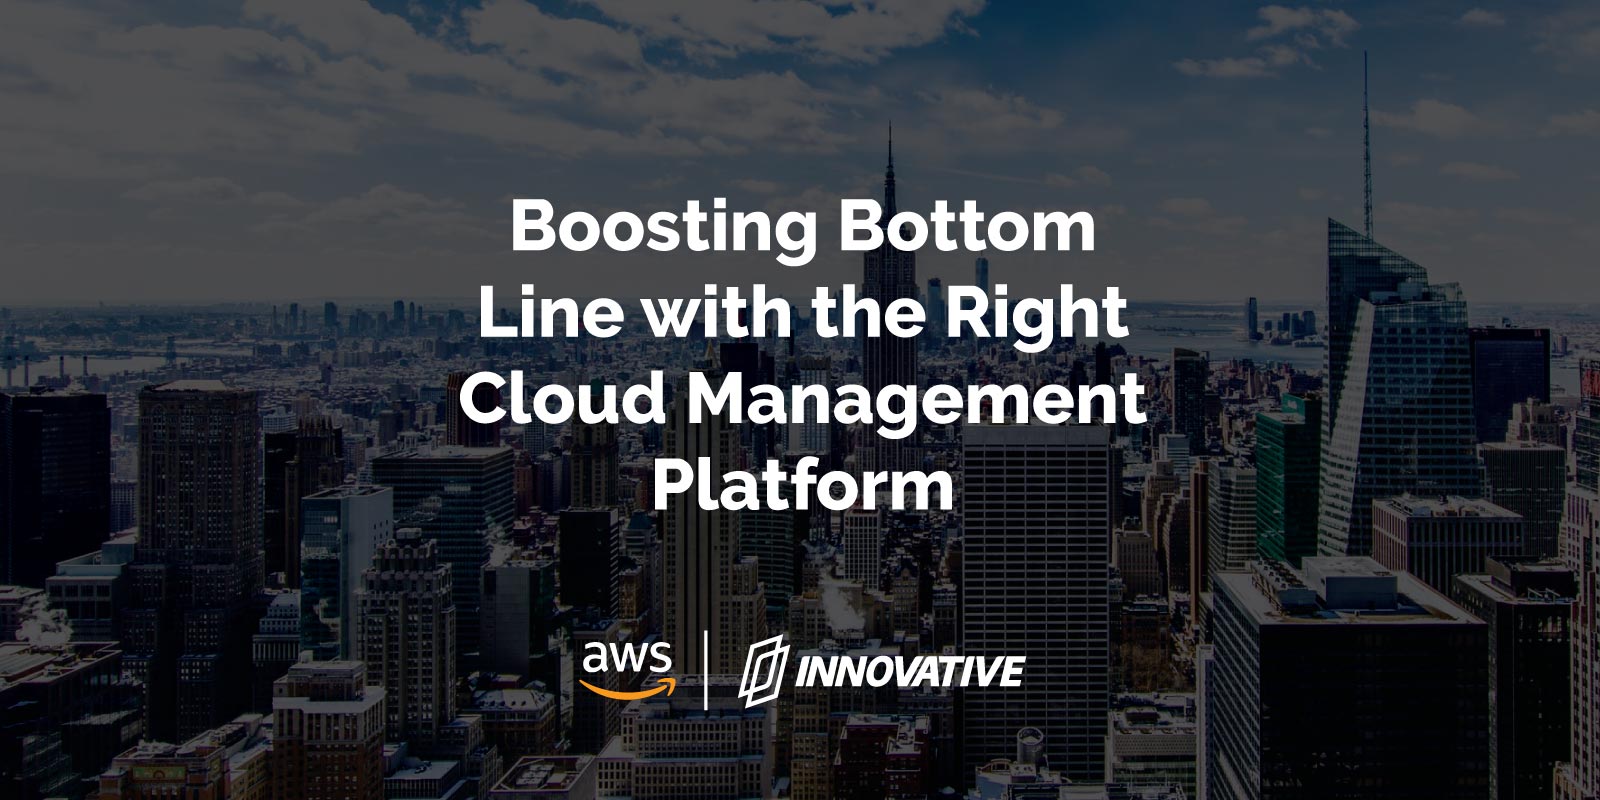 Boosting Bottom Line with the Right Cloud Management Platform